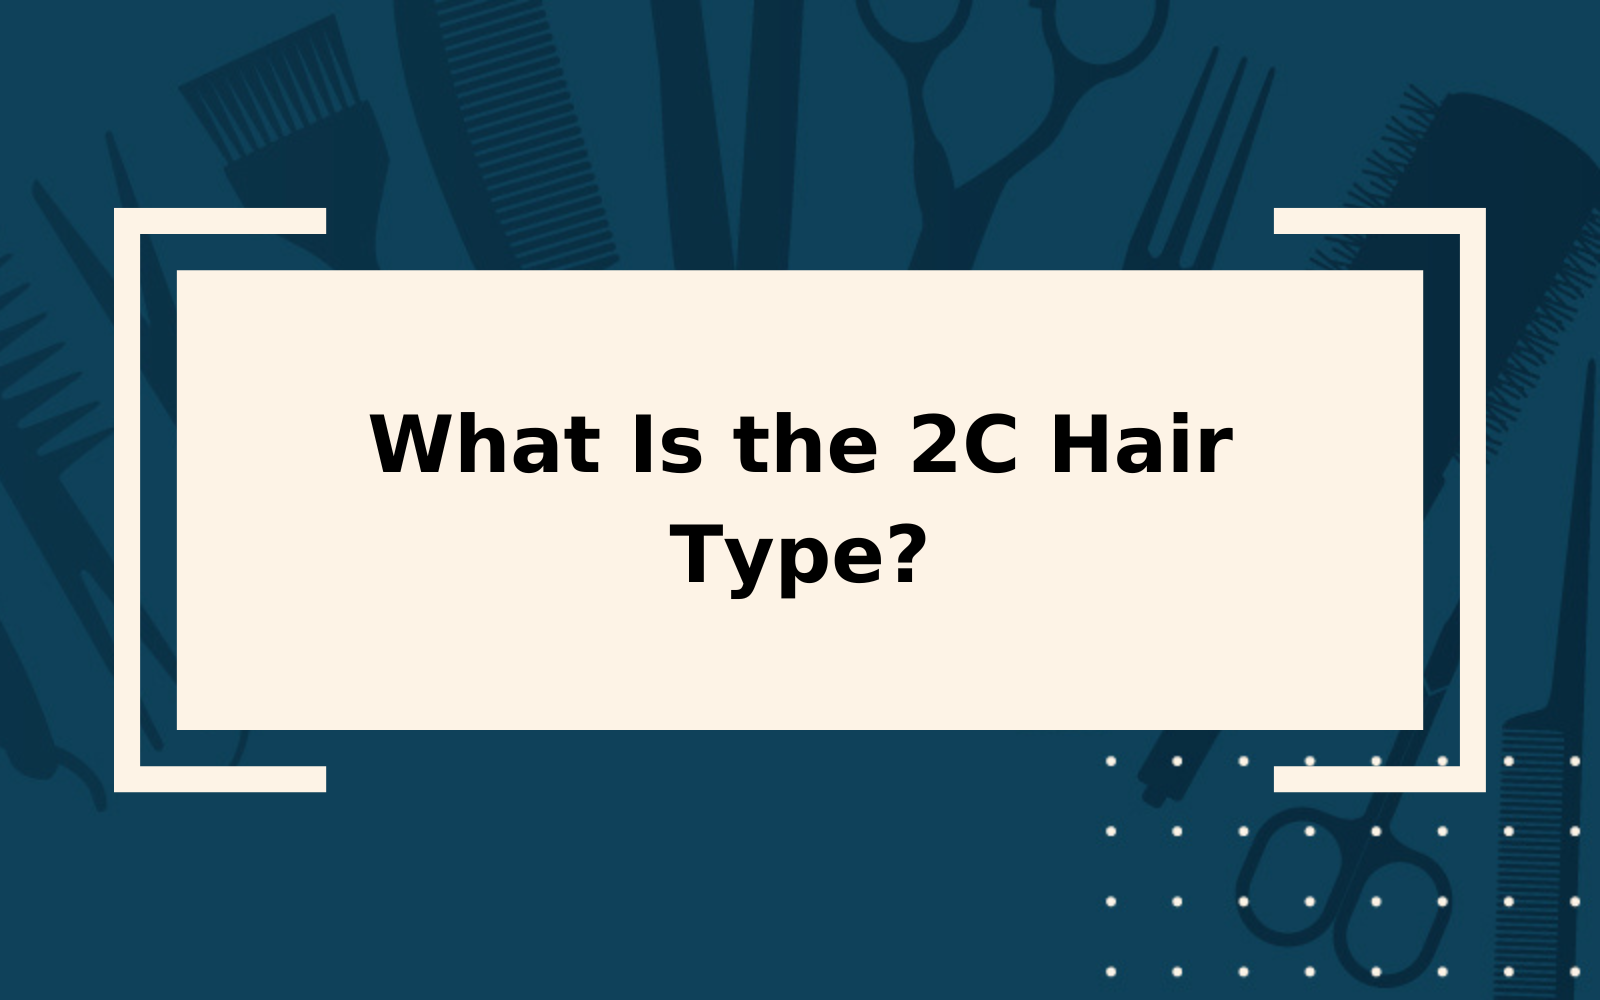 The 2C Hair Type | Quick Reference Guide & Easy Care Tips